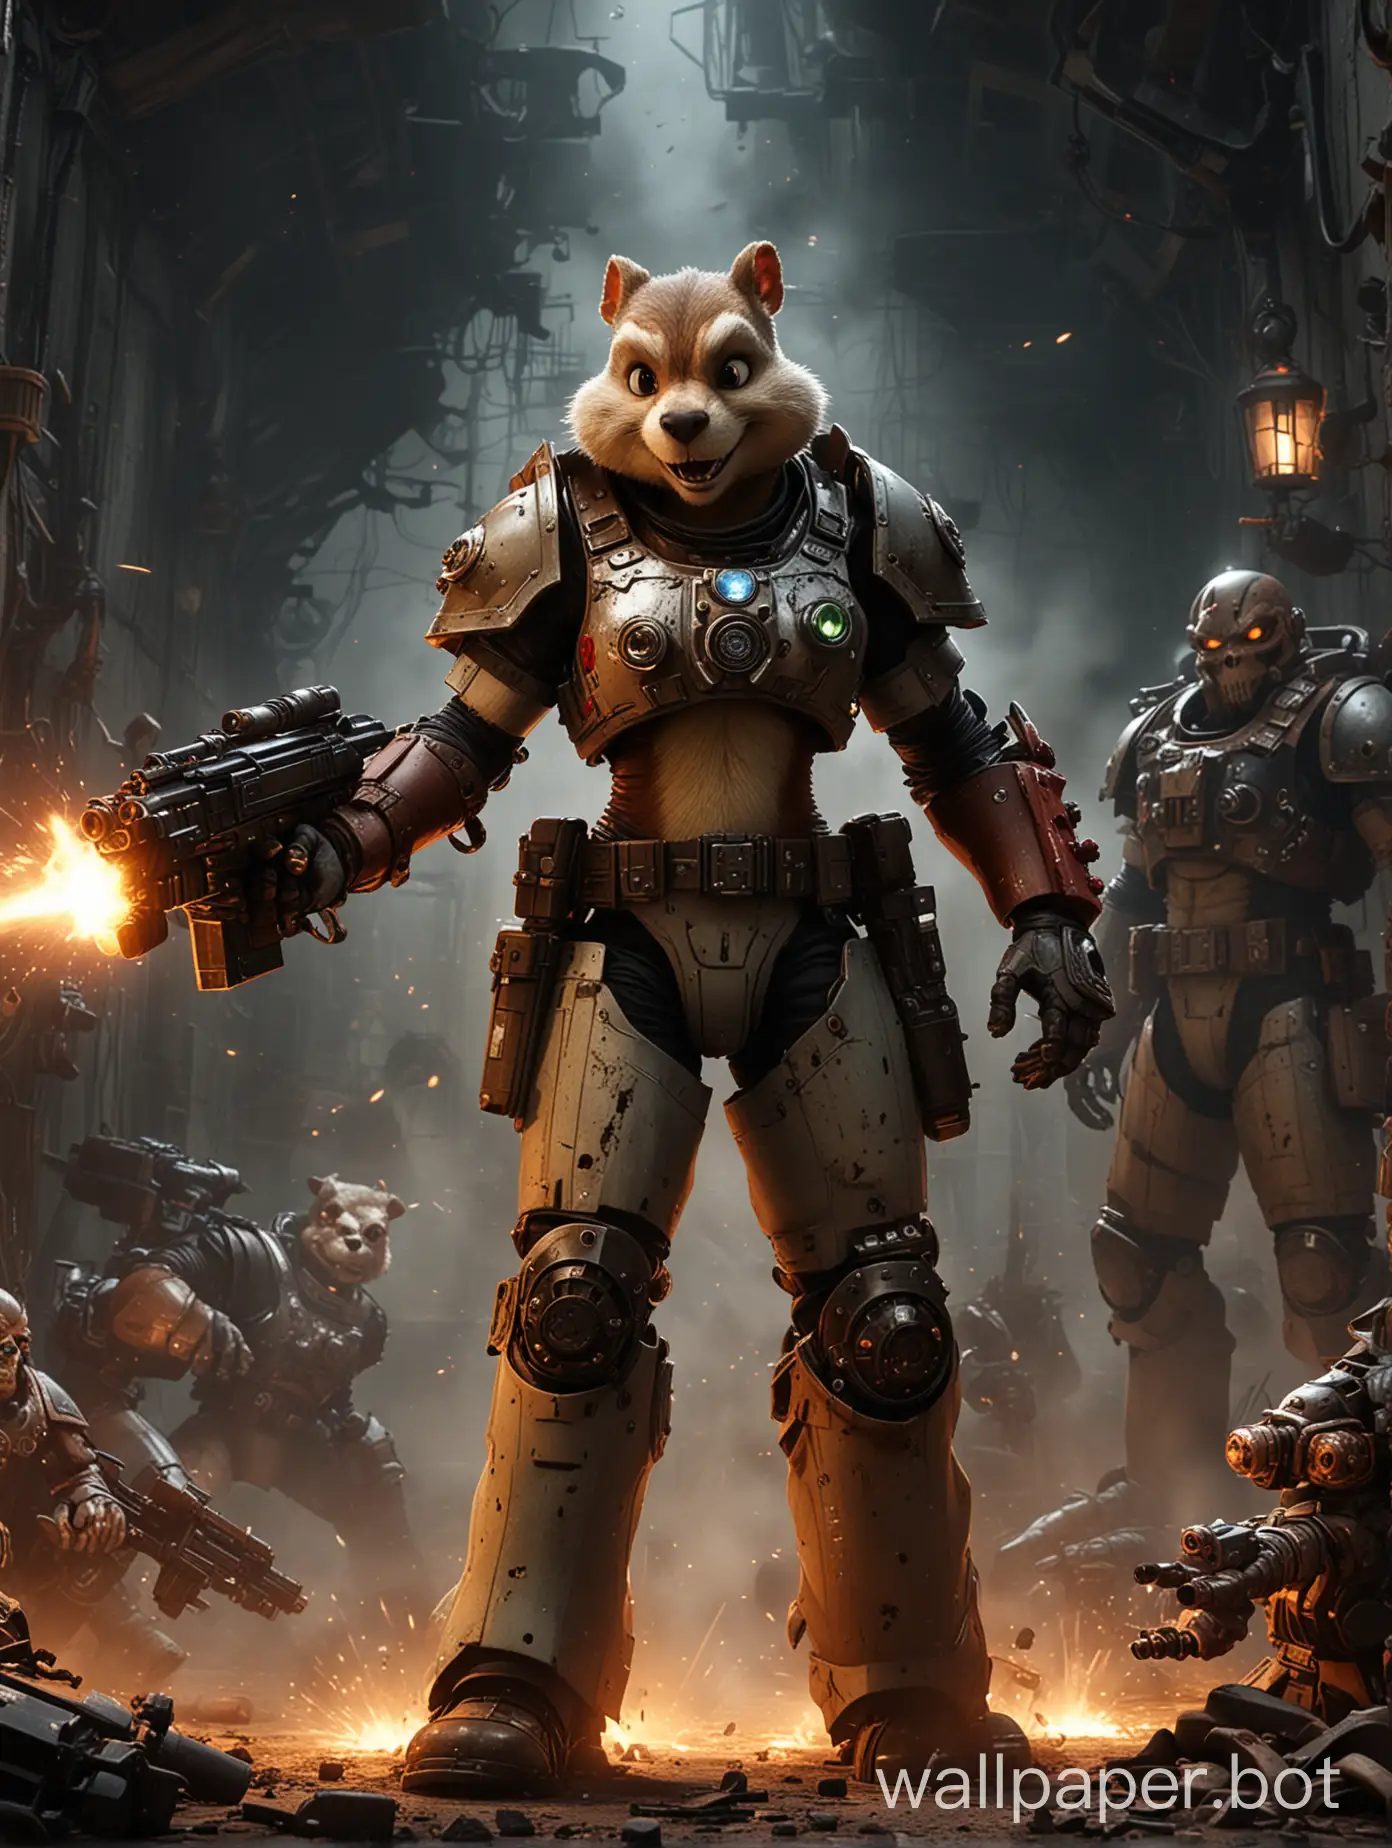 Chip and Dale, gadget_hackwrench, Warhammer 40K, science fiction, no humans, weapon, sparks, space marine armor, (horror) war setting with gunfire, dark atmosphere, full body, warhammer 40000